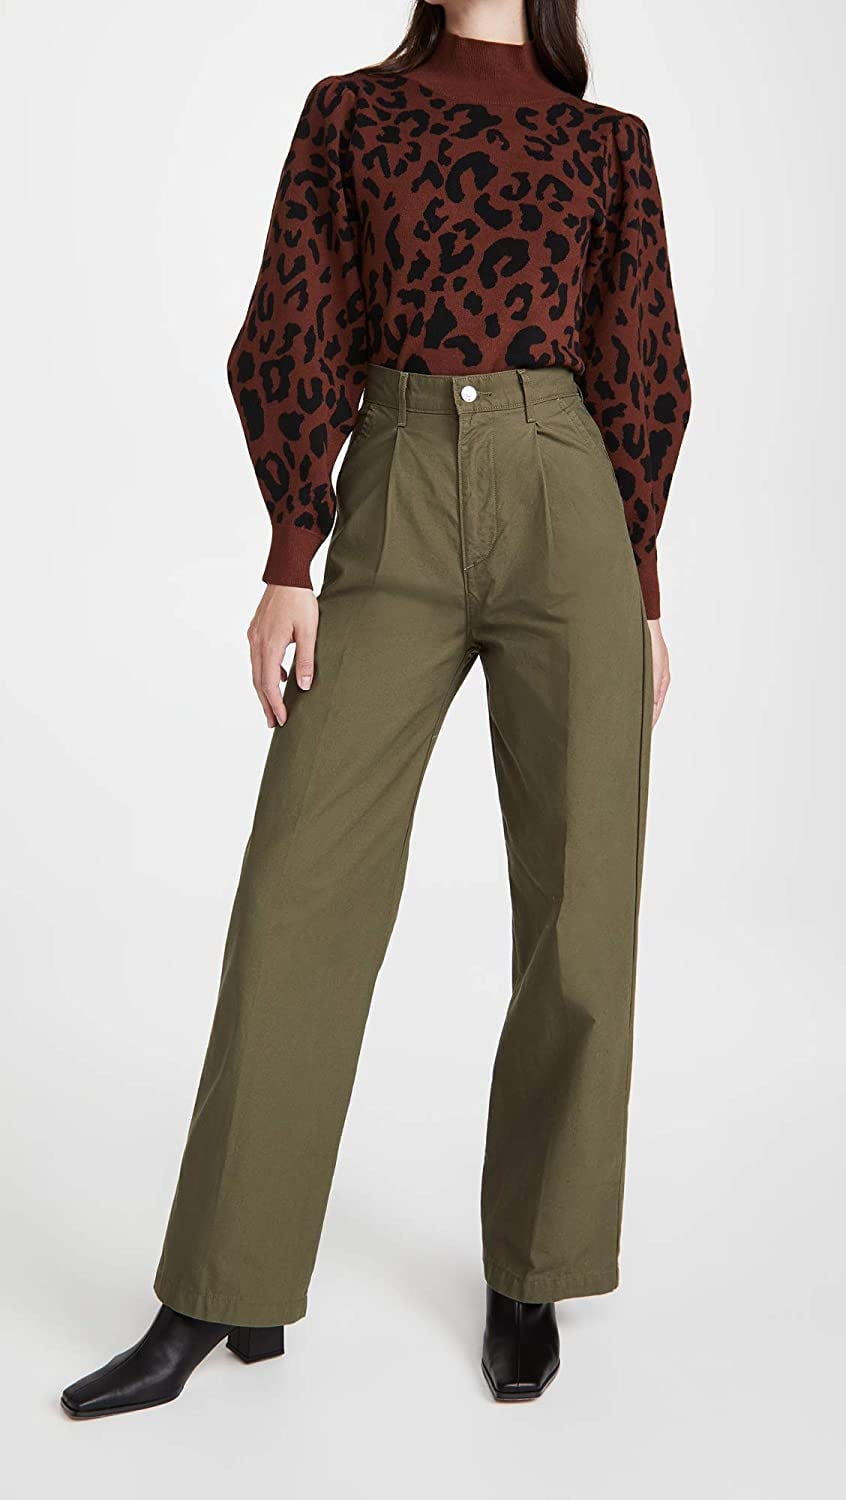 Levi's Pleated High Loose Pants | Amazon Has a Huge Selection of Comfy Pants,  and These Are the 17 Pairs We Love | POPSUGAR Fashion Photo 11